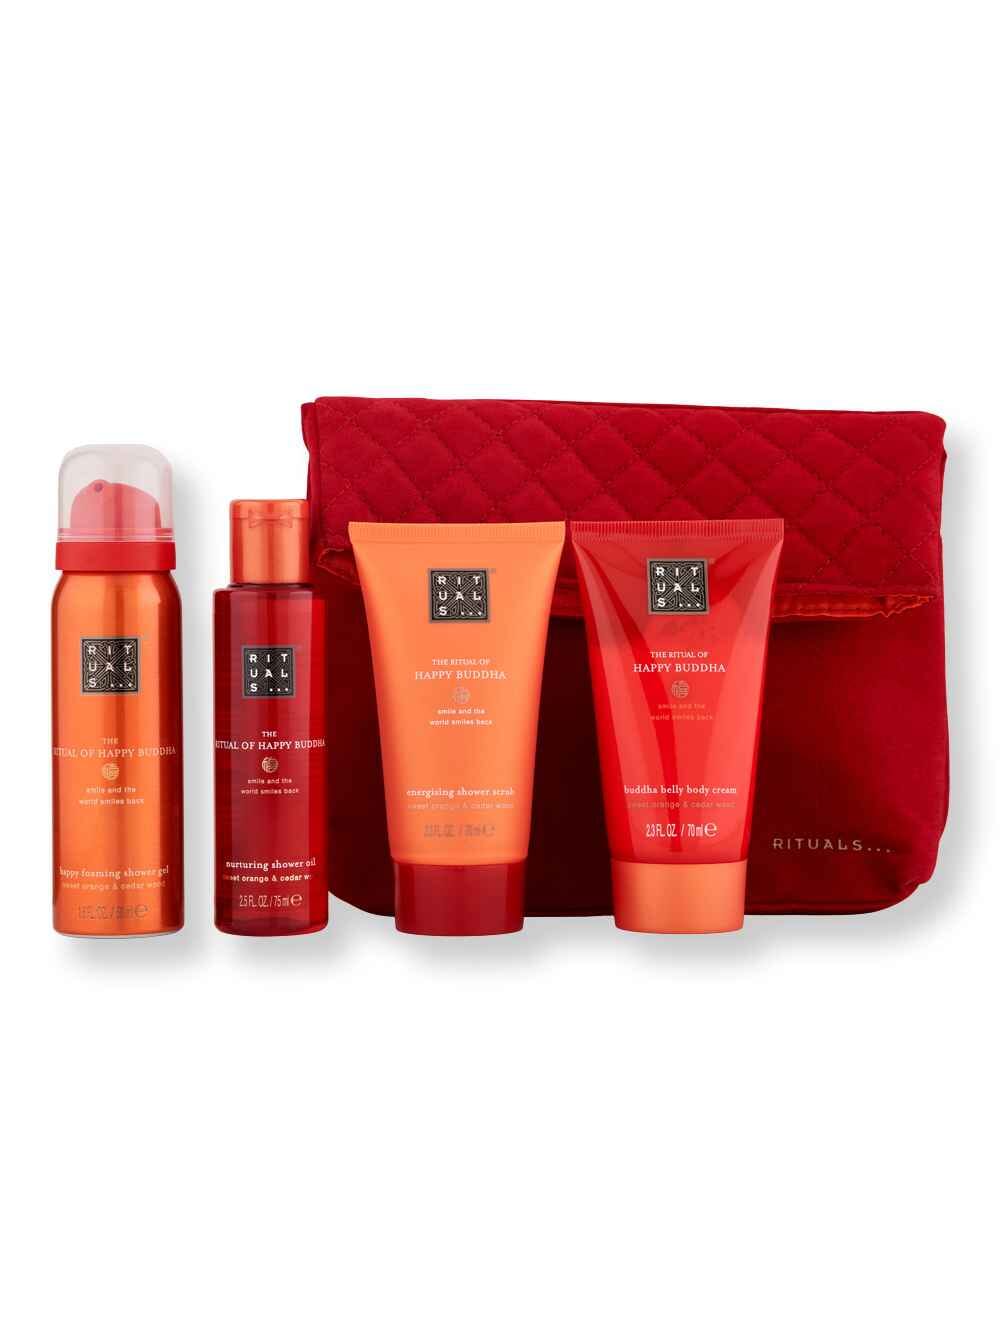 Rituals Rituals The Ritual of Happy Buddha Travel Exclusives Skin Care Gift Sets 